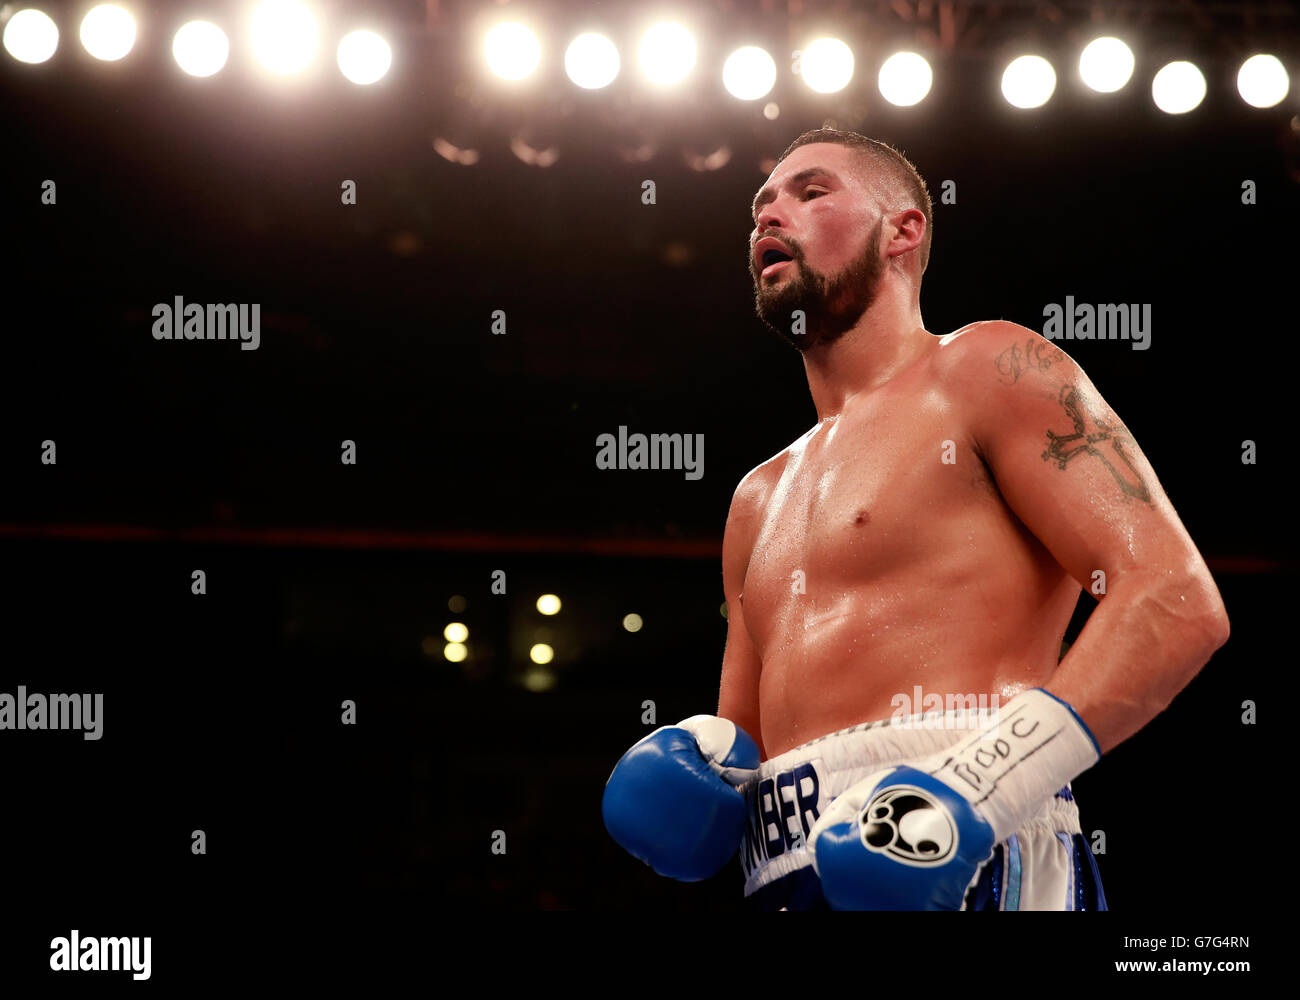 Tony Bellew in action against in their WBO & WBA Intercontinental Cruiserweight Title fight at the Liverpool Echo Arena, Liverpool. PRESS ASSOCIATION Photo. Picture date: Saturday November 22, 2014. See PA Story BOXING Liverpool. Photo credit should read: Peter Byrne/PA Wire. during the WBO & WBA Intercontinental Cruiserweight Title fight at the Liverpool Echo Arena, Liverpool. PRESS ASSOCIATION Photo. Picture date: Saturday November 22, 2014. See PA Story BOXING Liverpool. Photo credit should read: Peter Byrne/PA Wire. Stock Photo